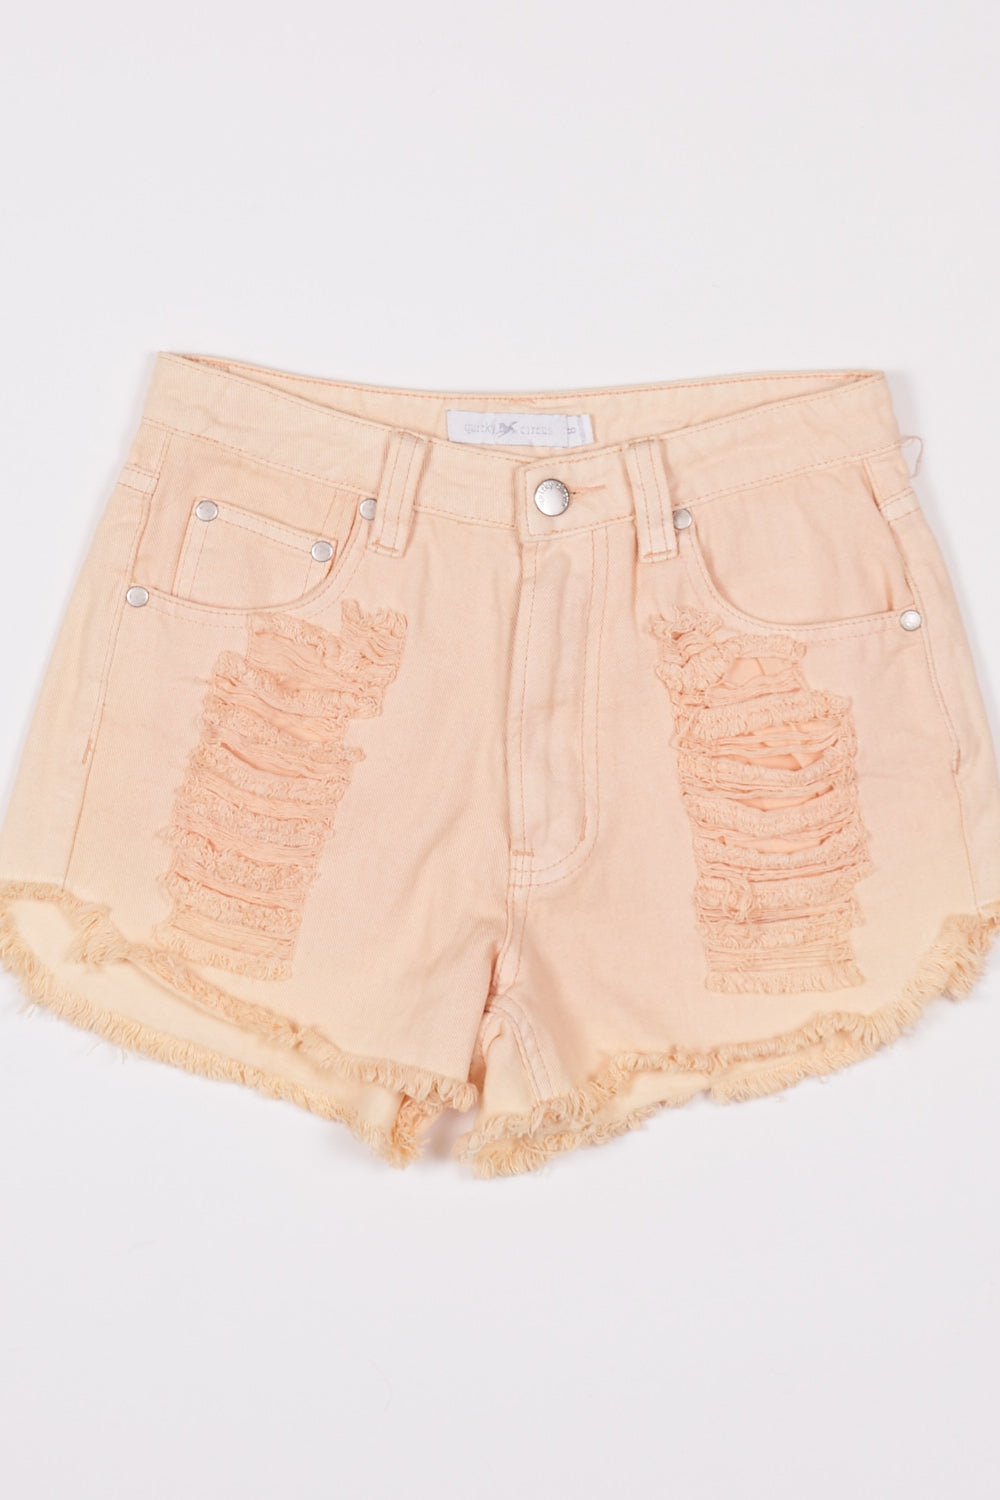 Quirky Circus Yellow Distressed Denim Shorts AU 8 / 26